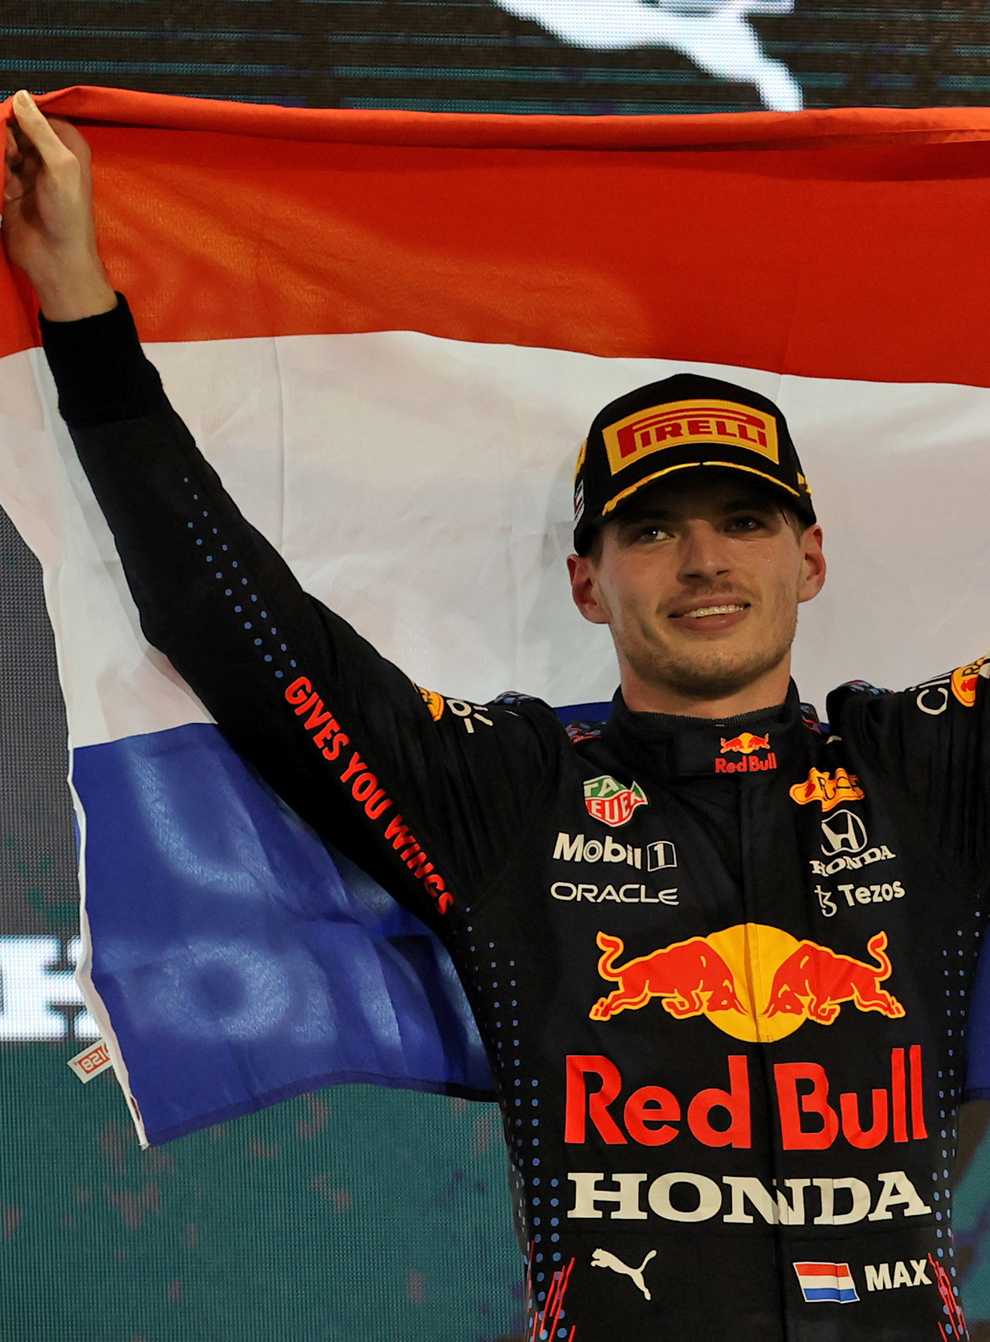 World champion Max Verstappen will unveil his new car on February 9 (PA Wire/PA Images)